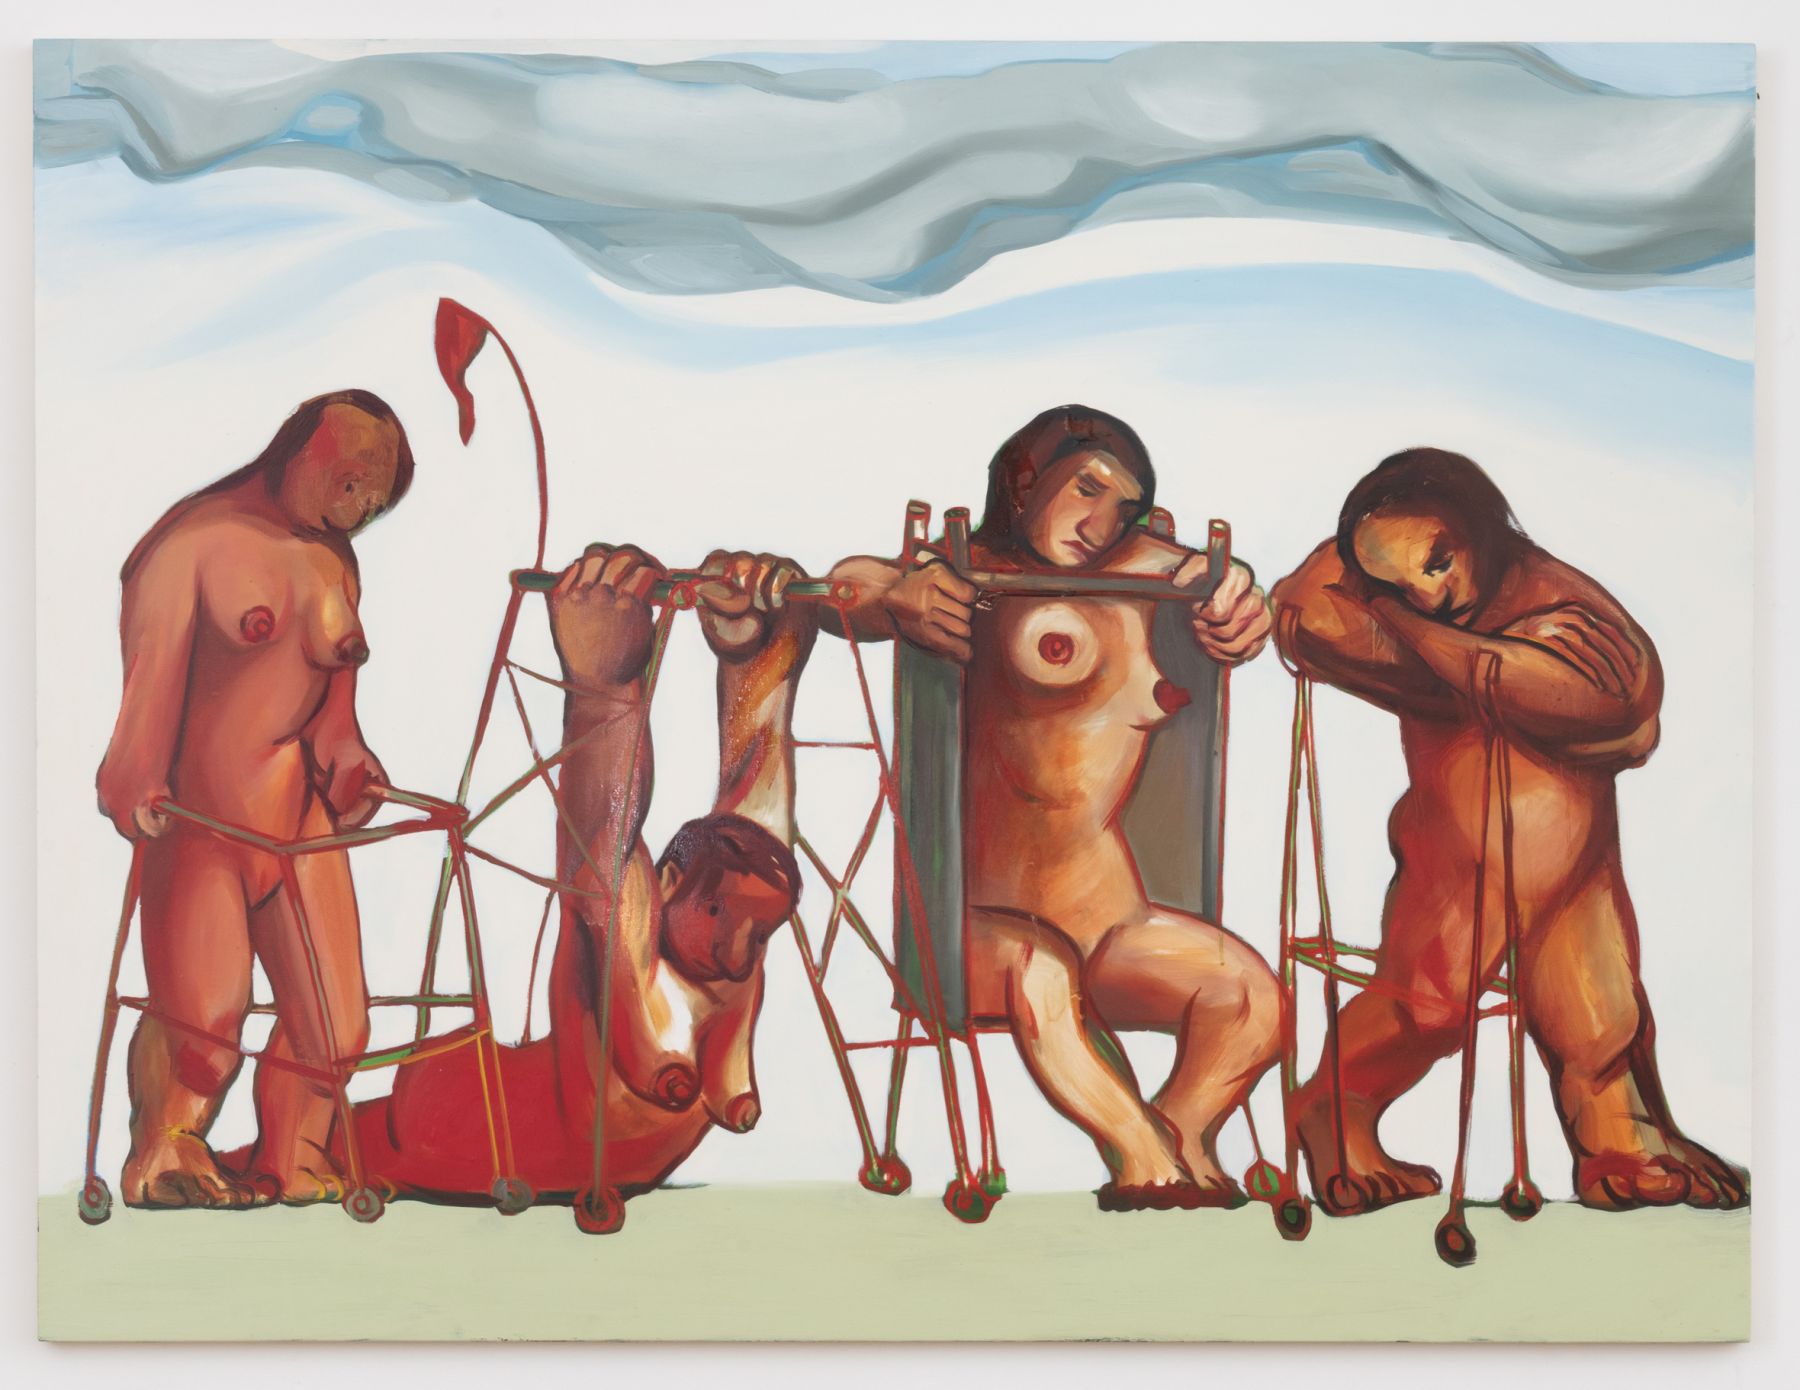 Nicole Eisenman. Support Systems For Women. 1998